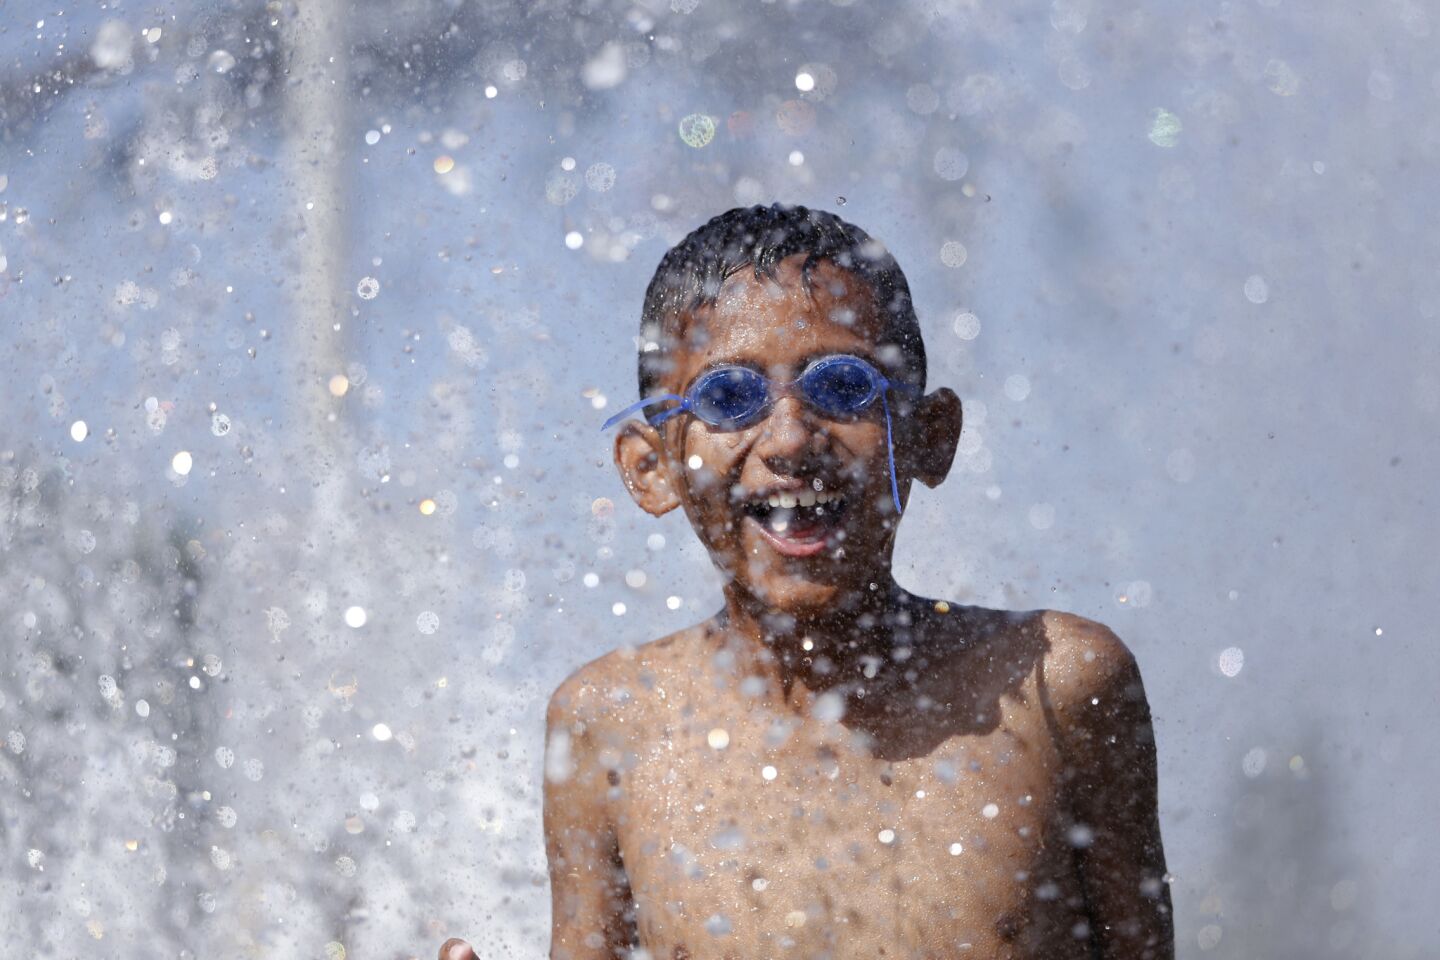 Adrian Rosales cools off at the spray pool at Lemon Park in Fullerton.